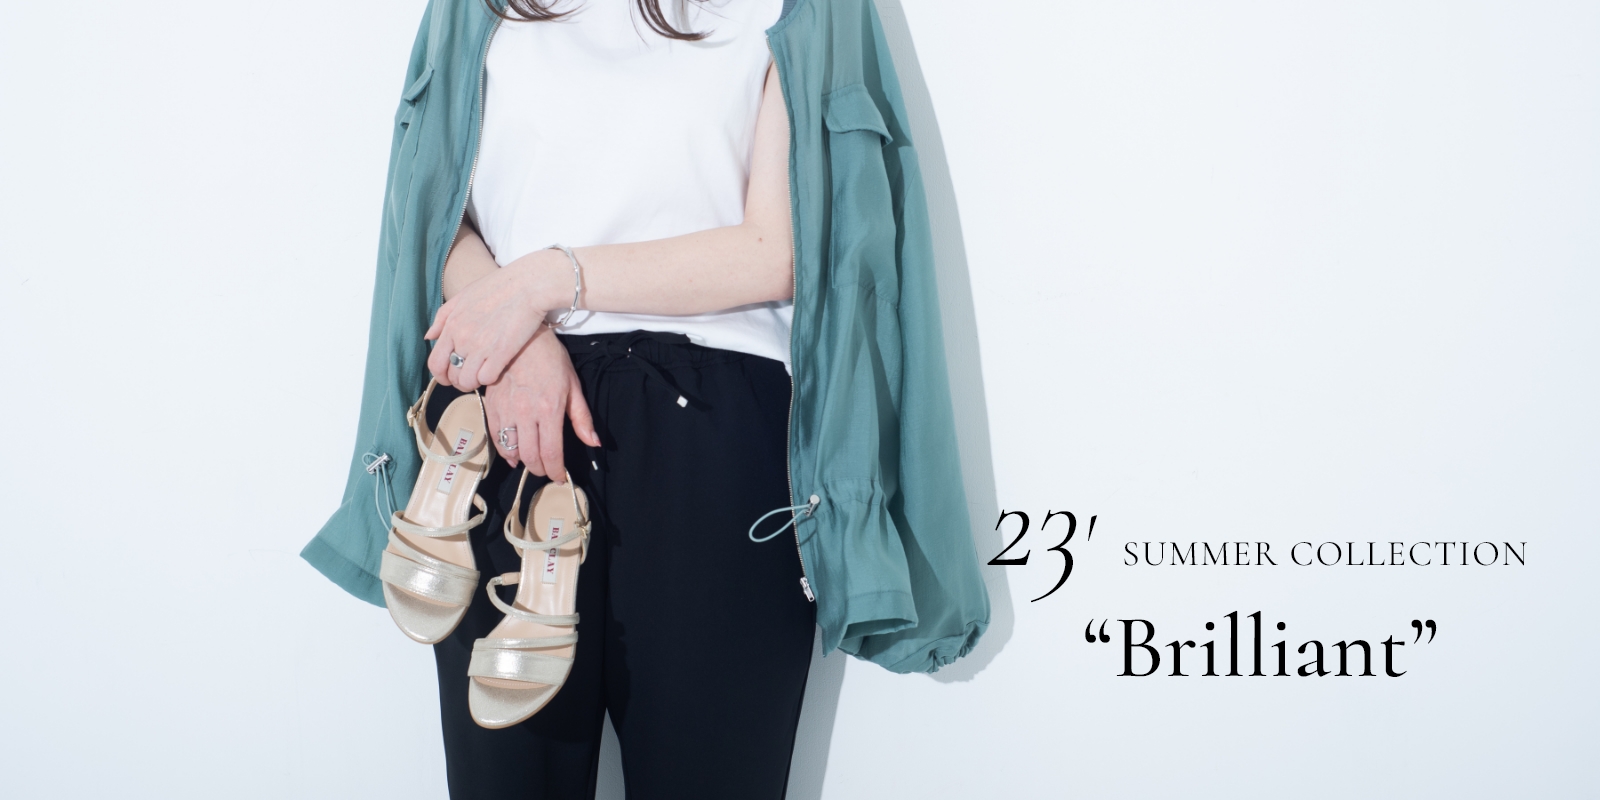 23' SUMMER COLLECTION “Brilliant”